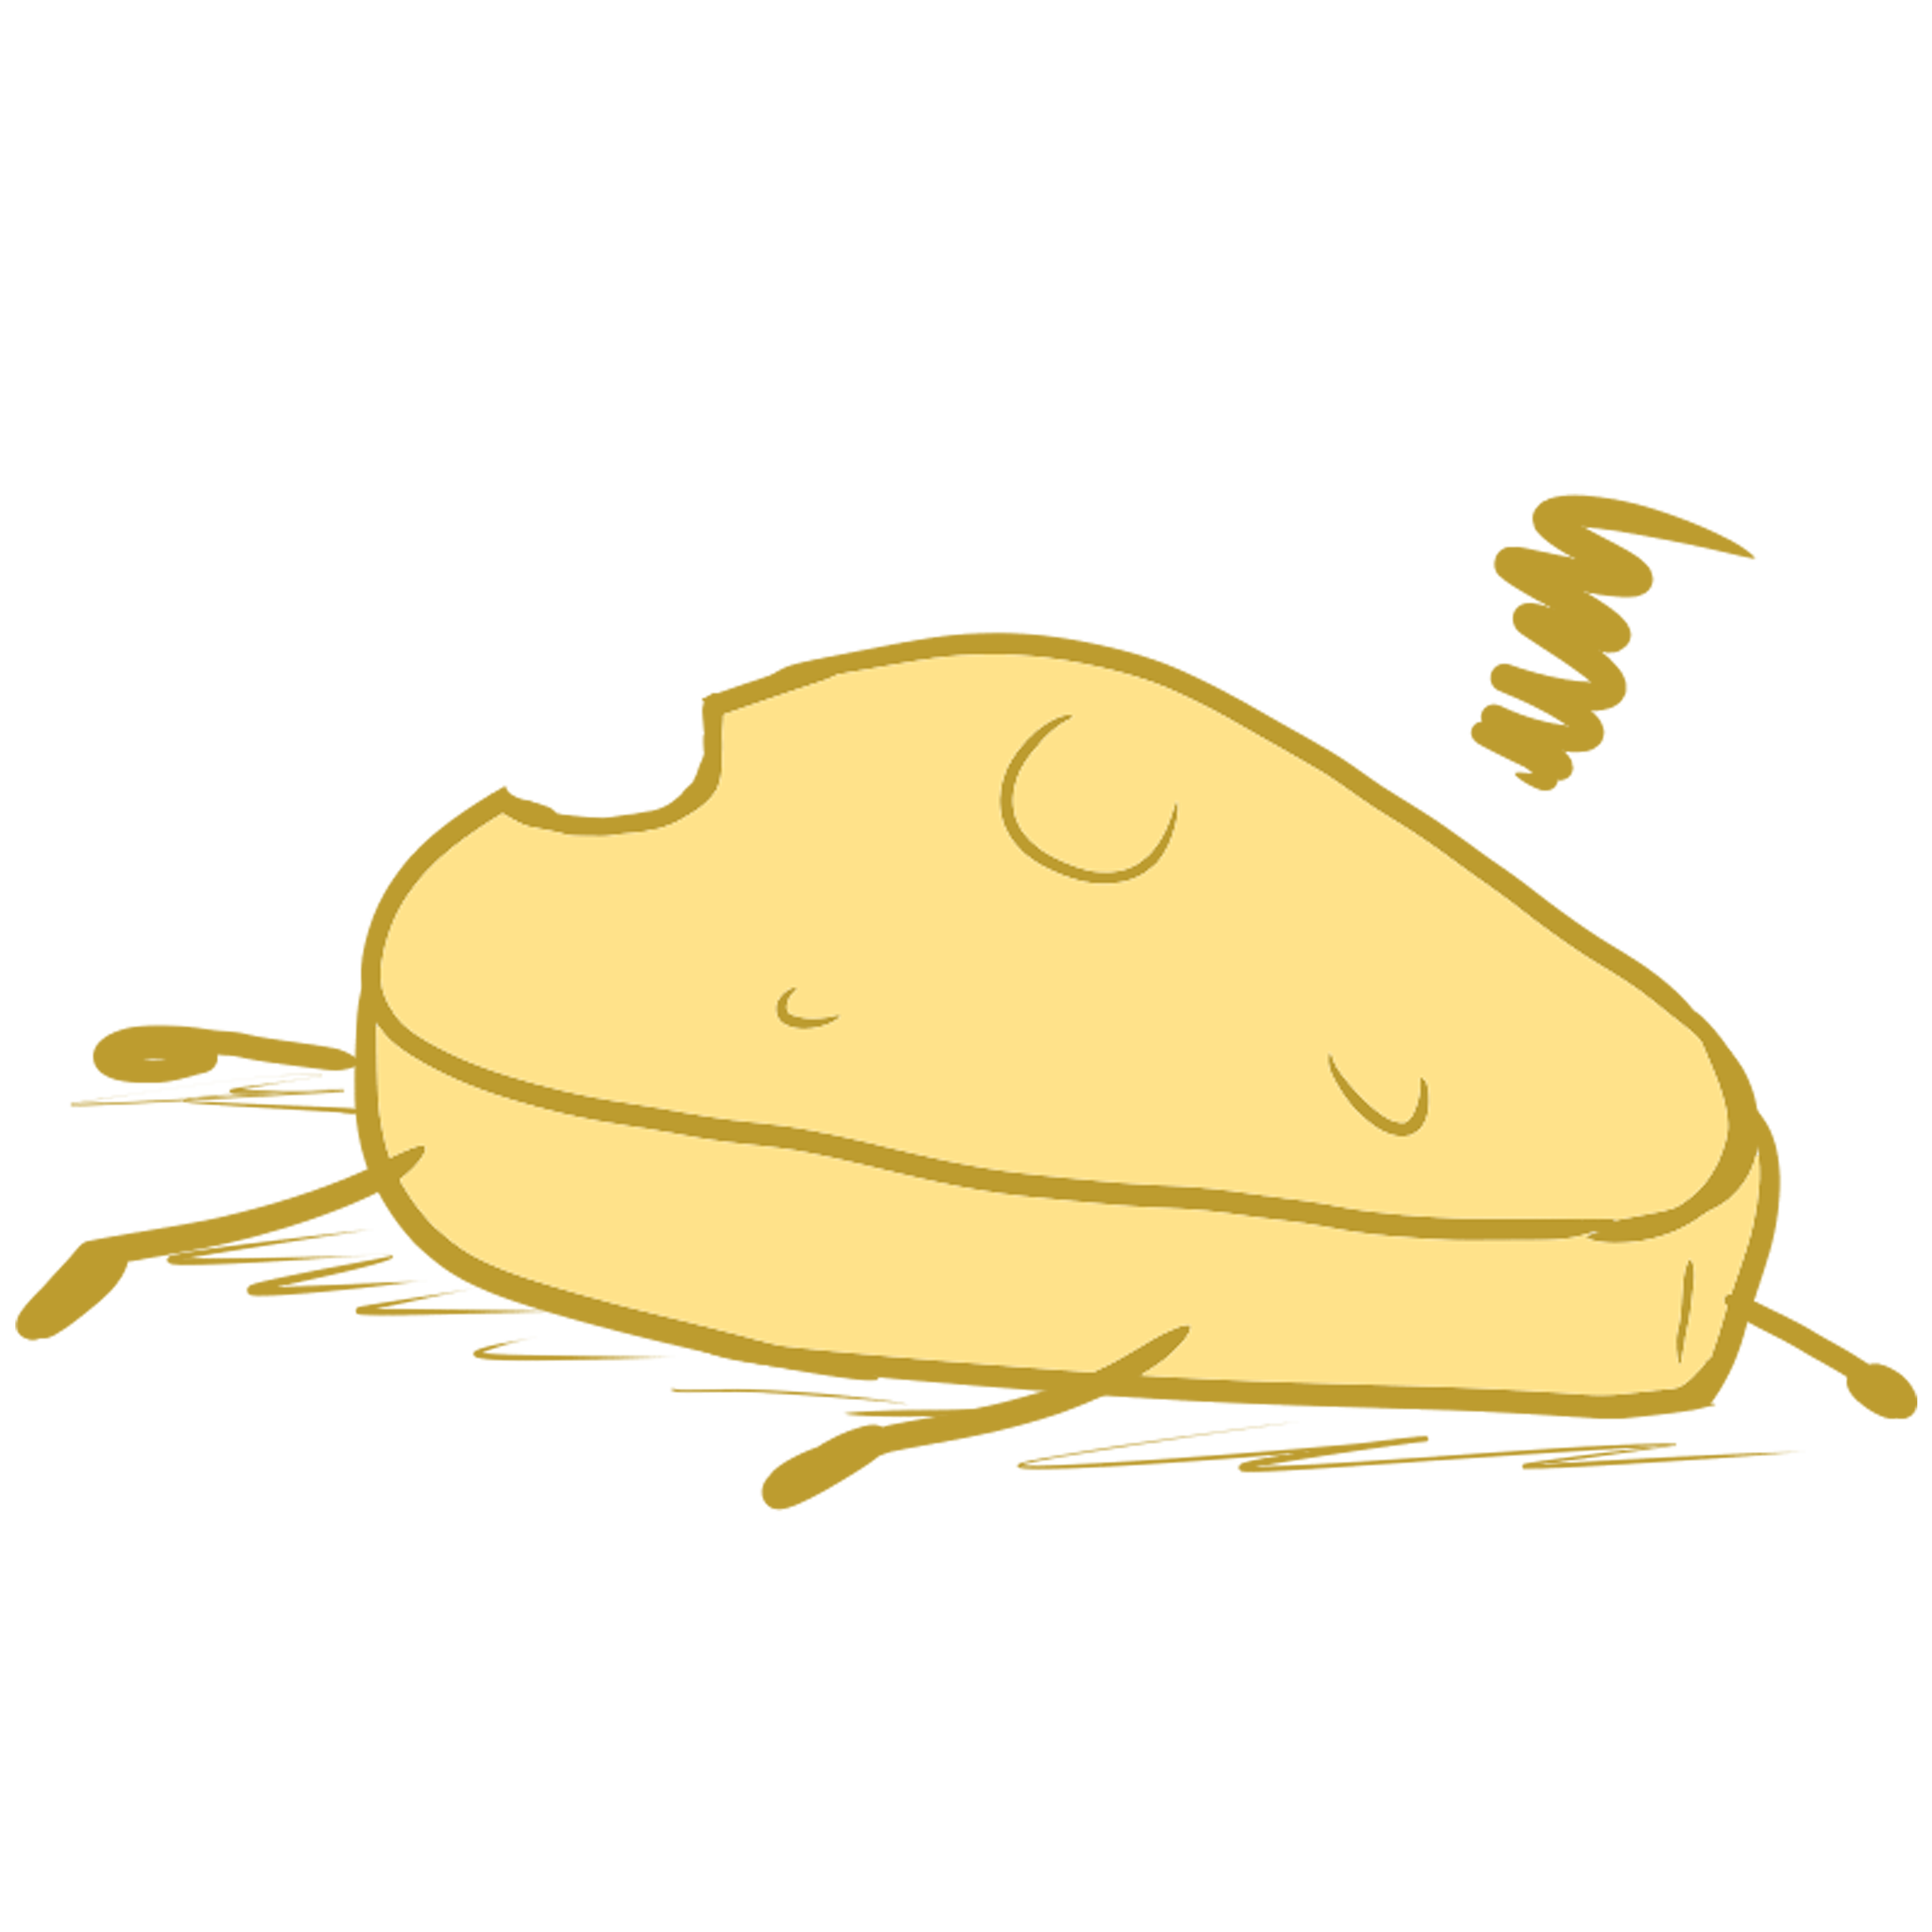 cheese character passed out on his face